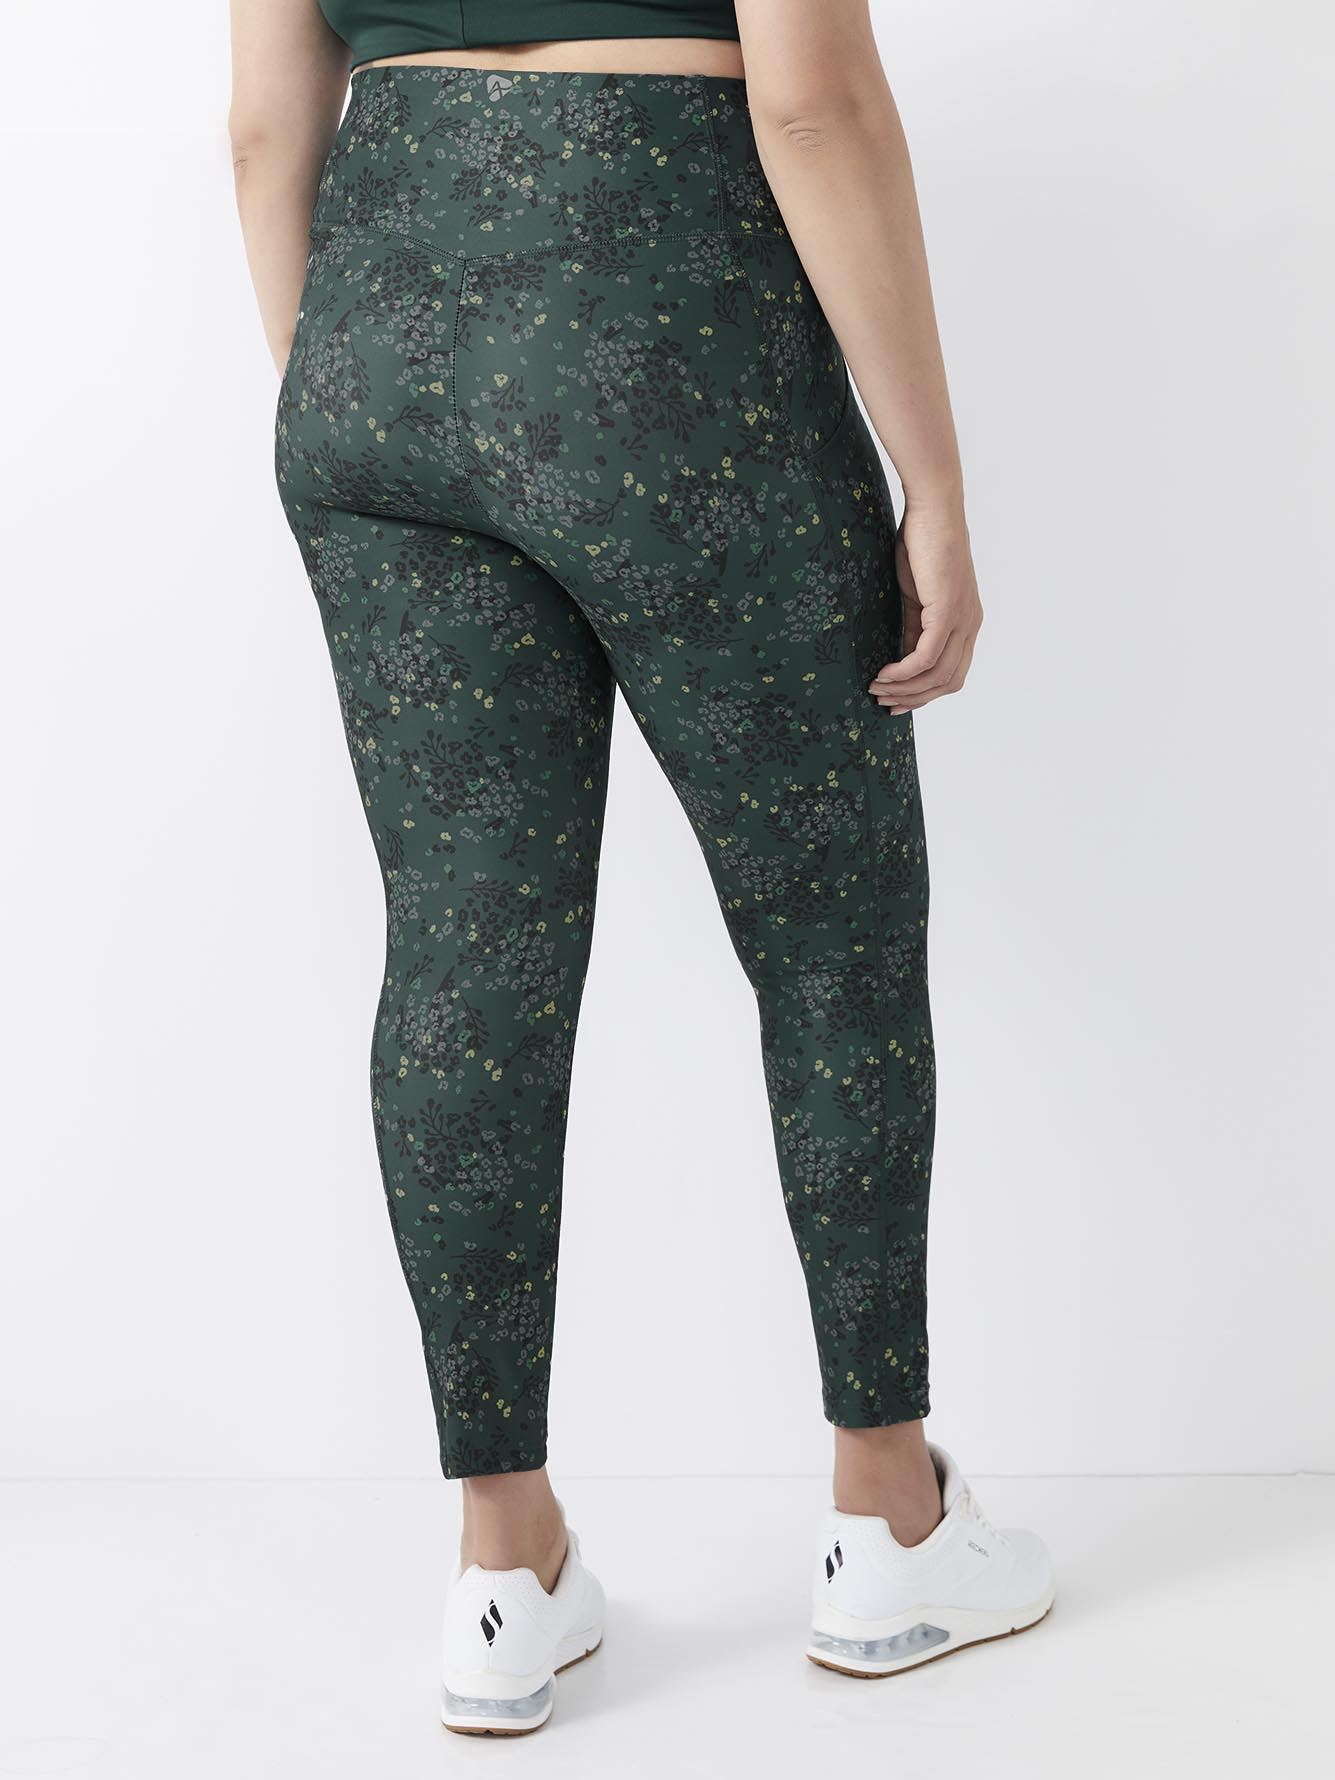 Responsible, Printed Legging with Side Pockets - Active Zone